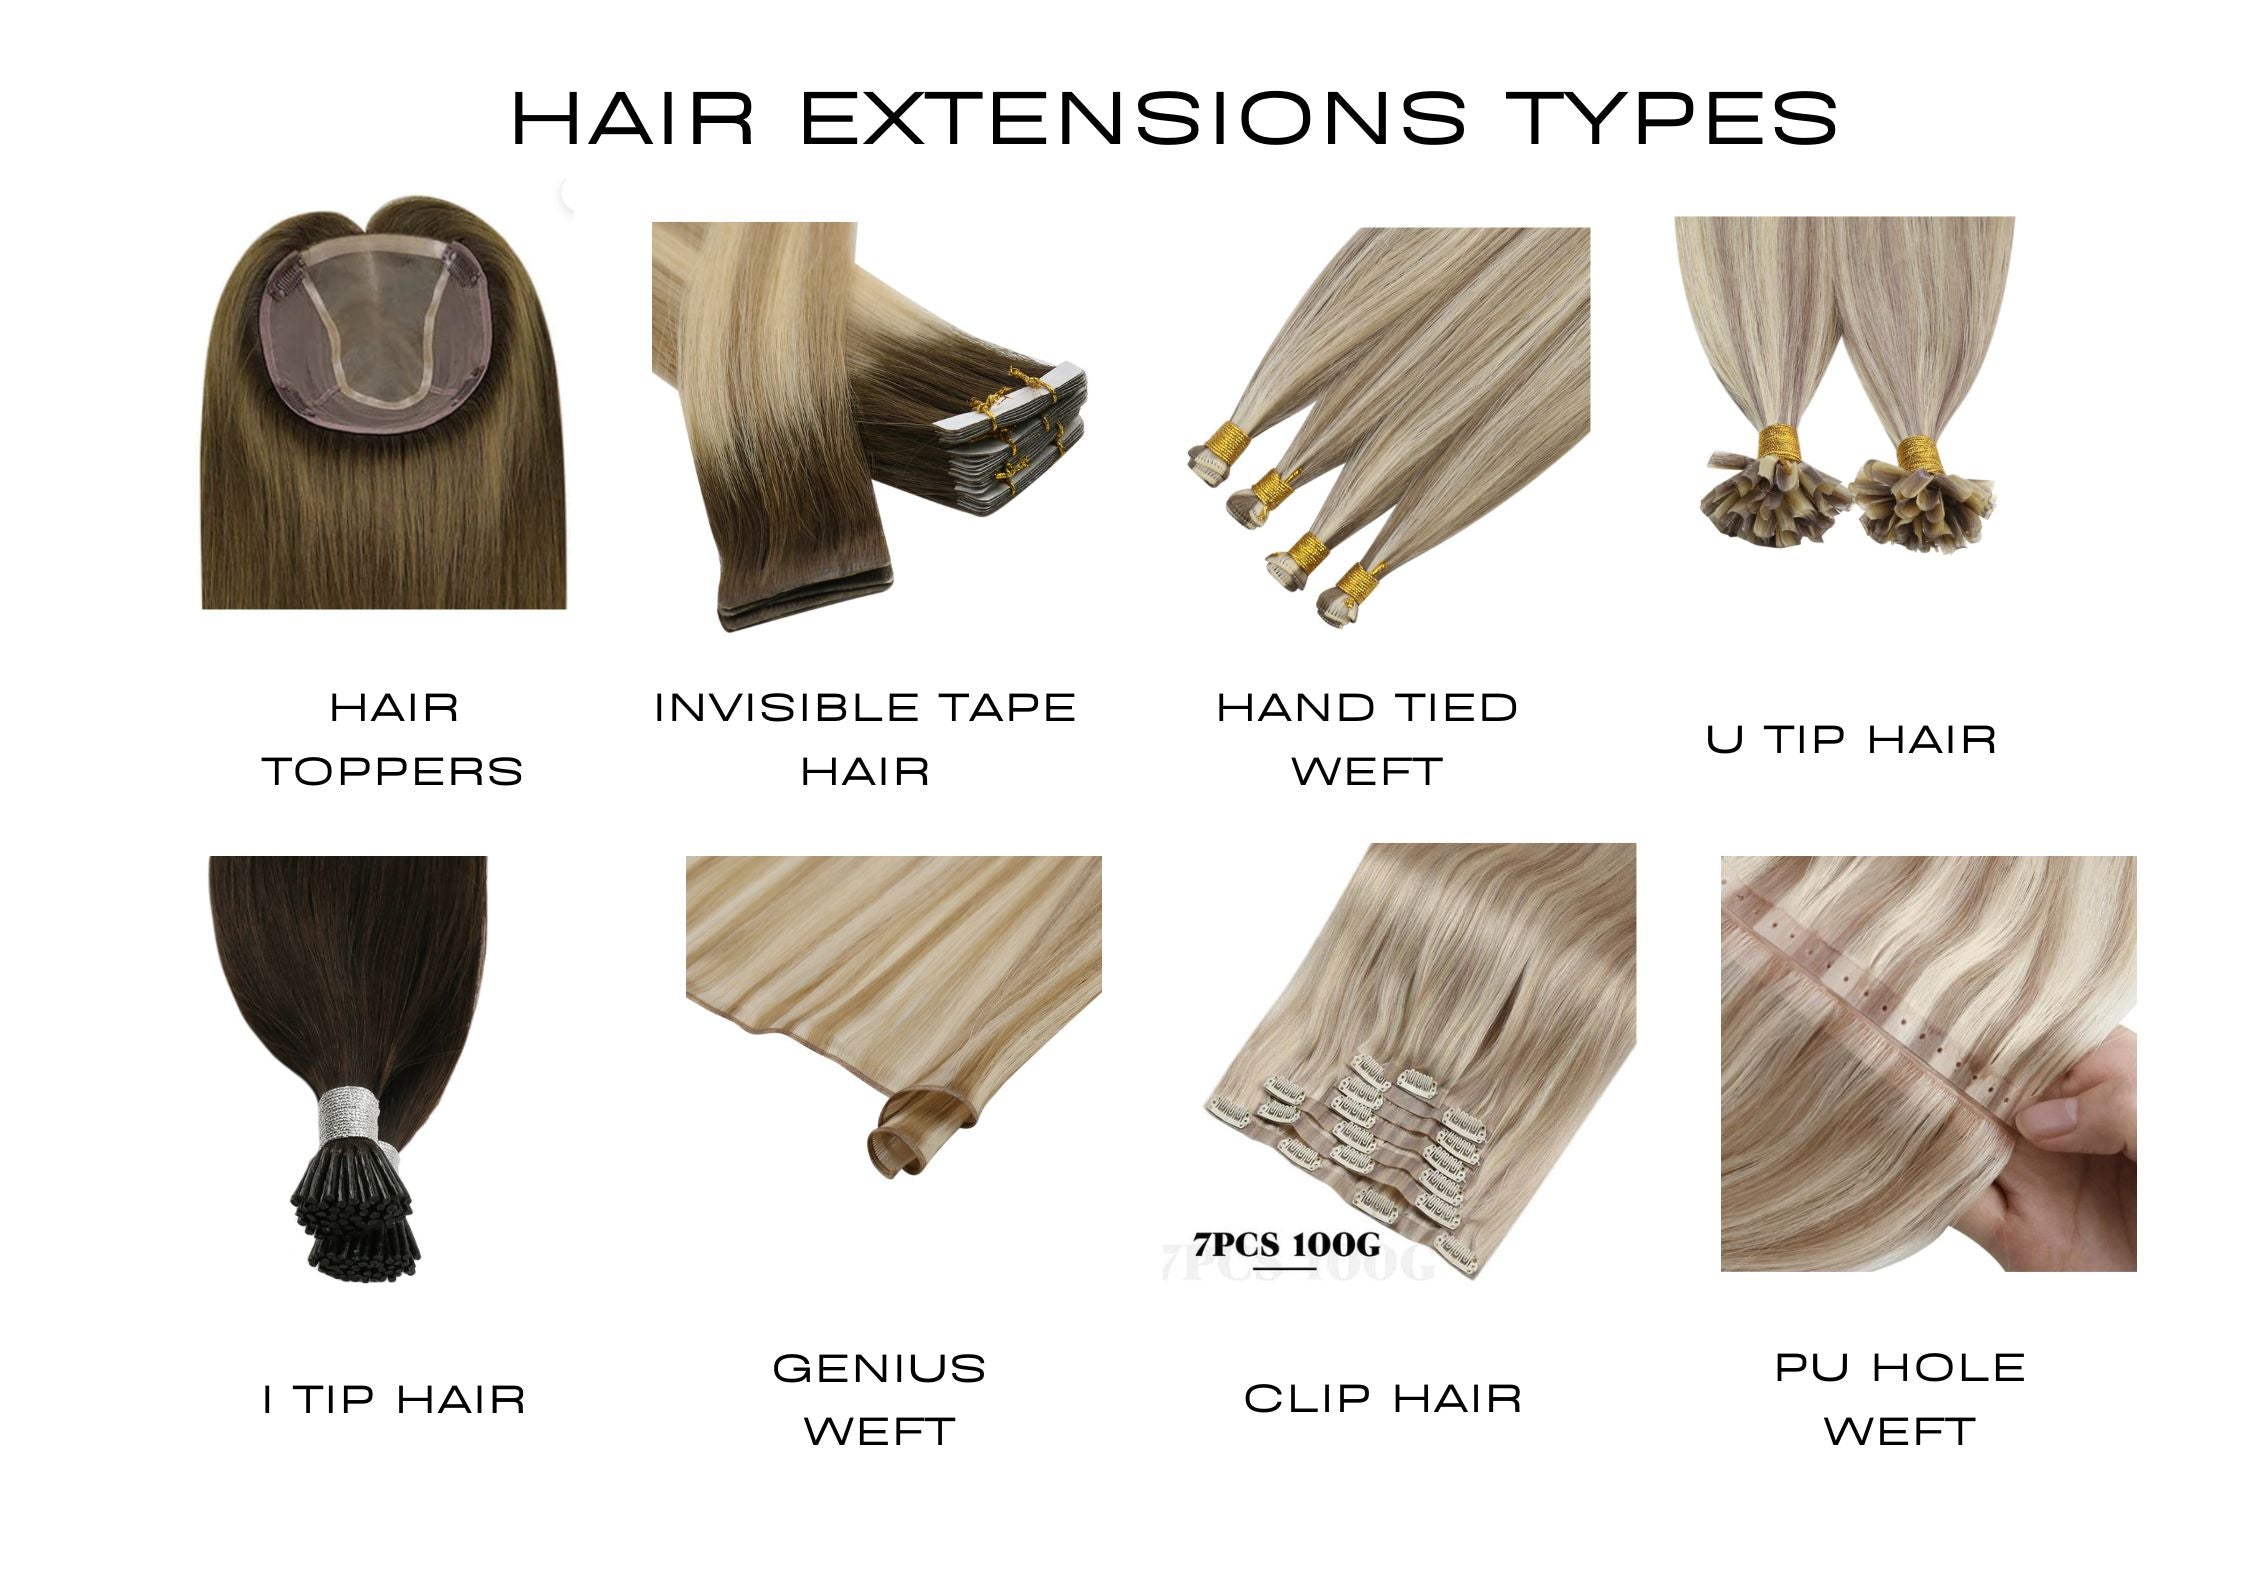 tape hair extensions,weft hair extensions,clip in hair extensions,hair extensions